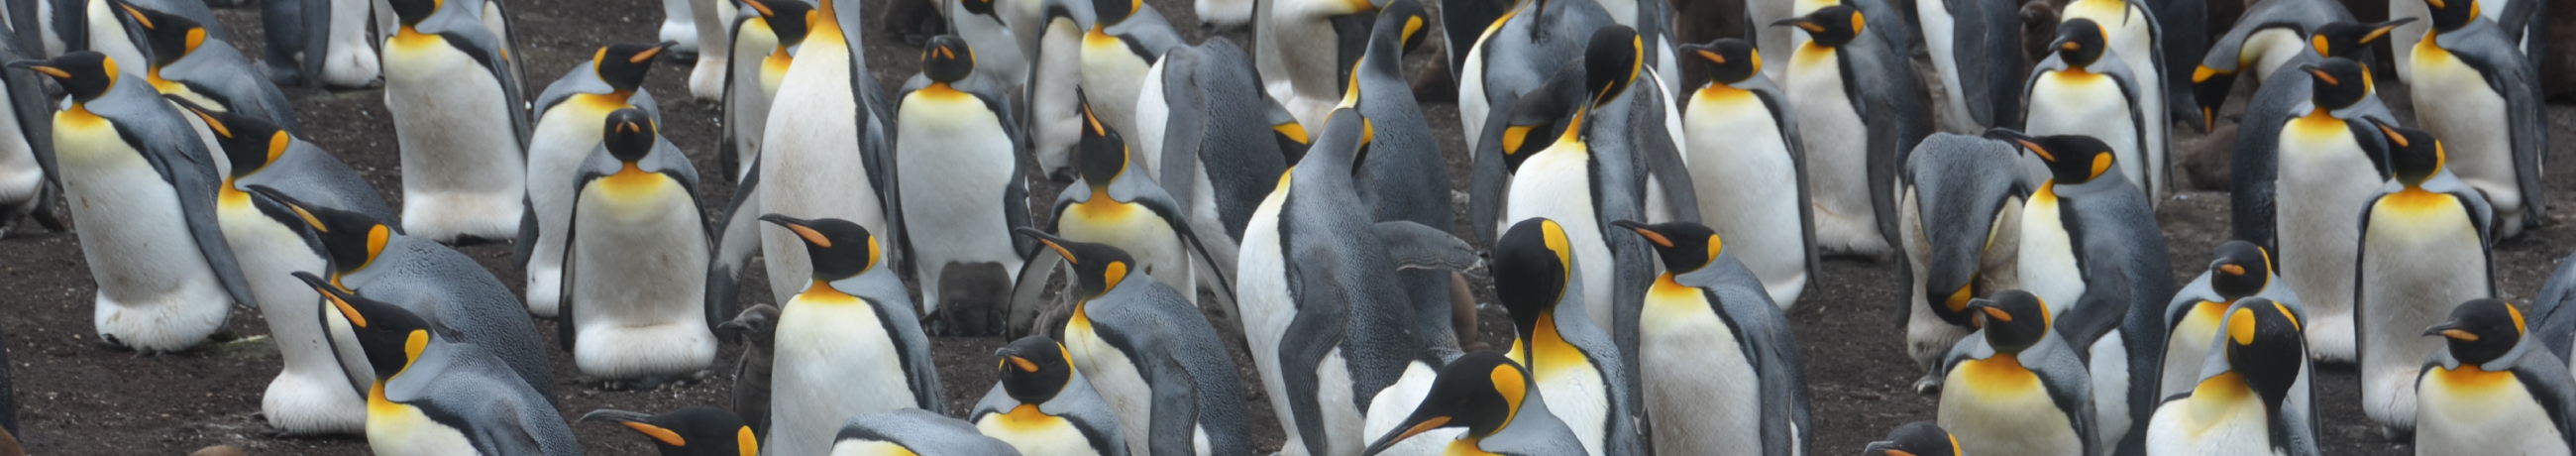 Crowd of penguins